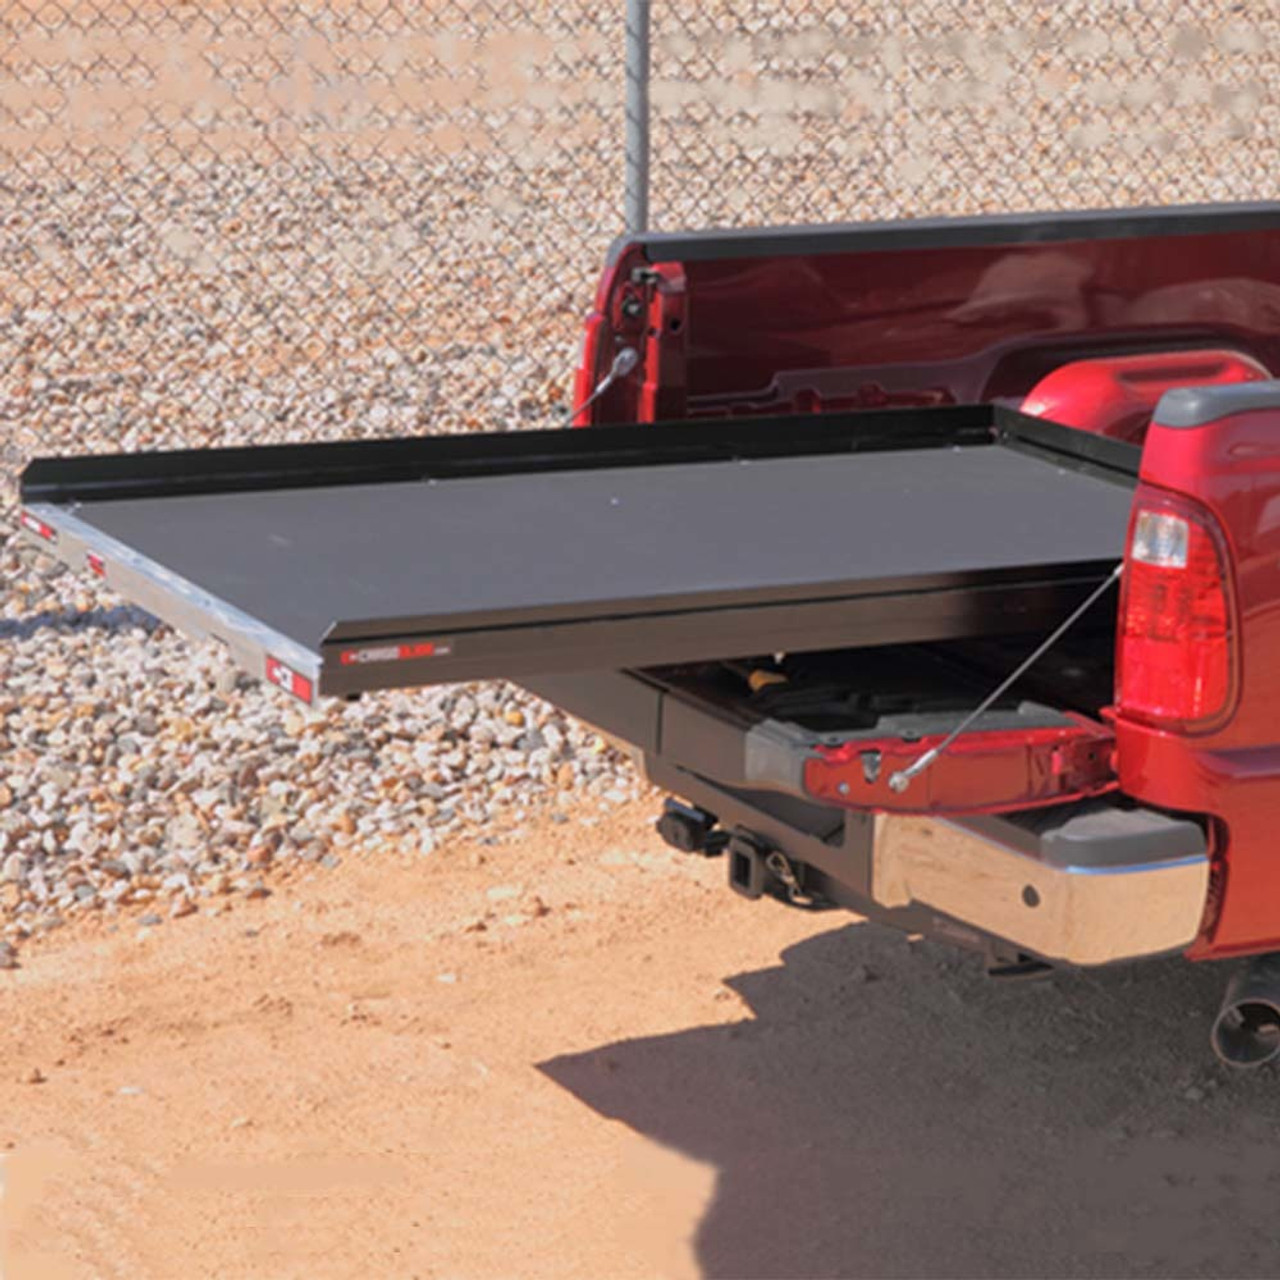 Cargo-Glide CG1000 Ford F150, Shortbed, 5.5ft, Steel Truck-Bed Slide and Extender, 1000 lb capacity, 65-75% Extension, 4" side rails, 3.875" deck height, includes installation kit